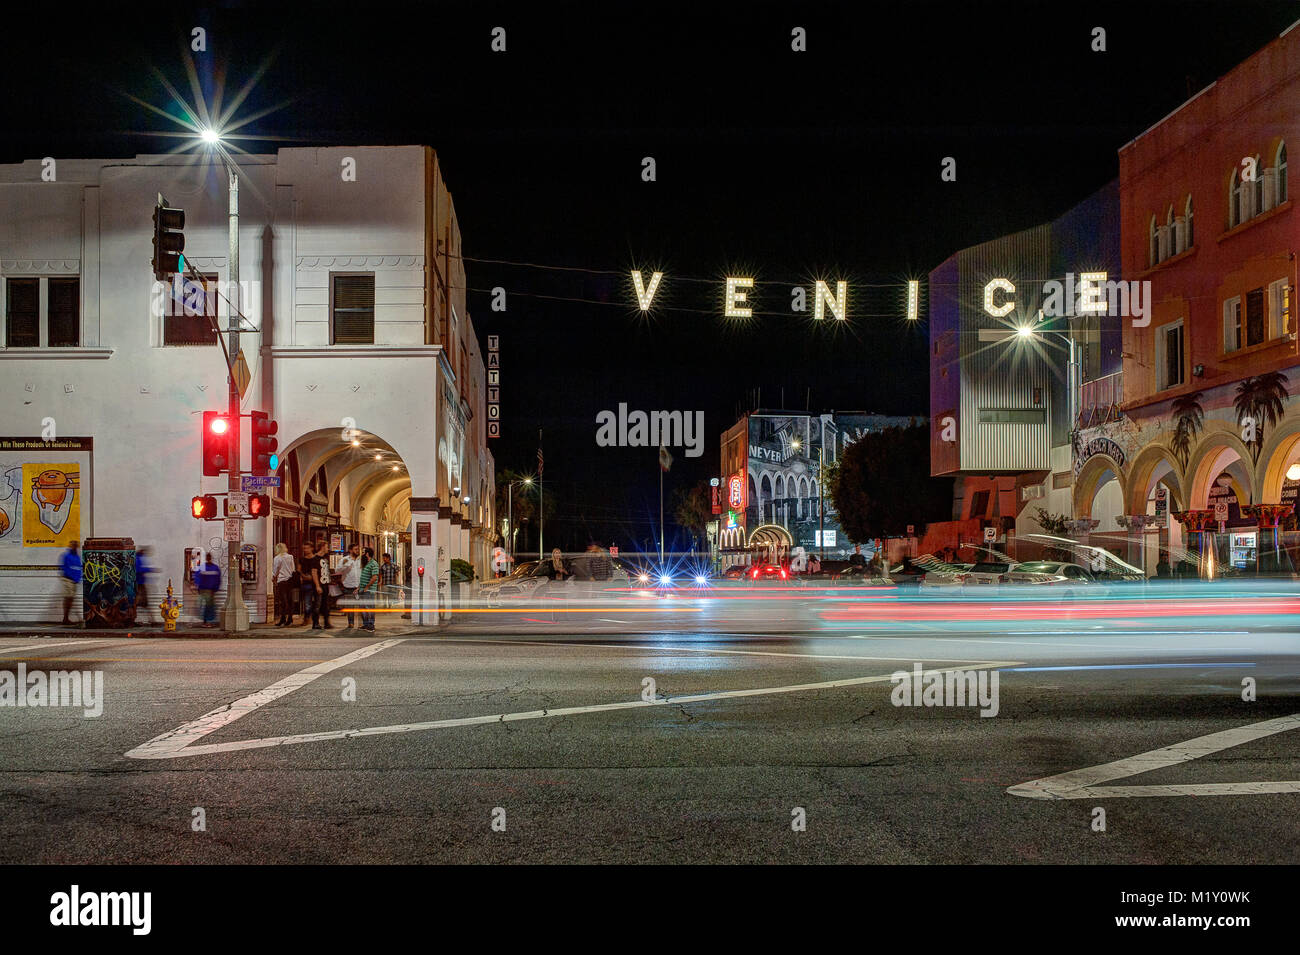 The iconic Venice Beach Lighted Sign photographed at night in Venice Beach, CA. Stock Photo